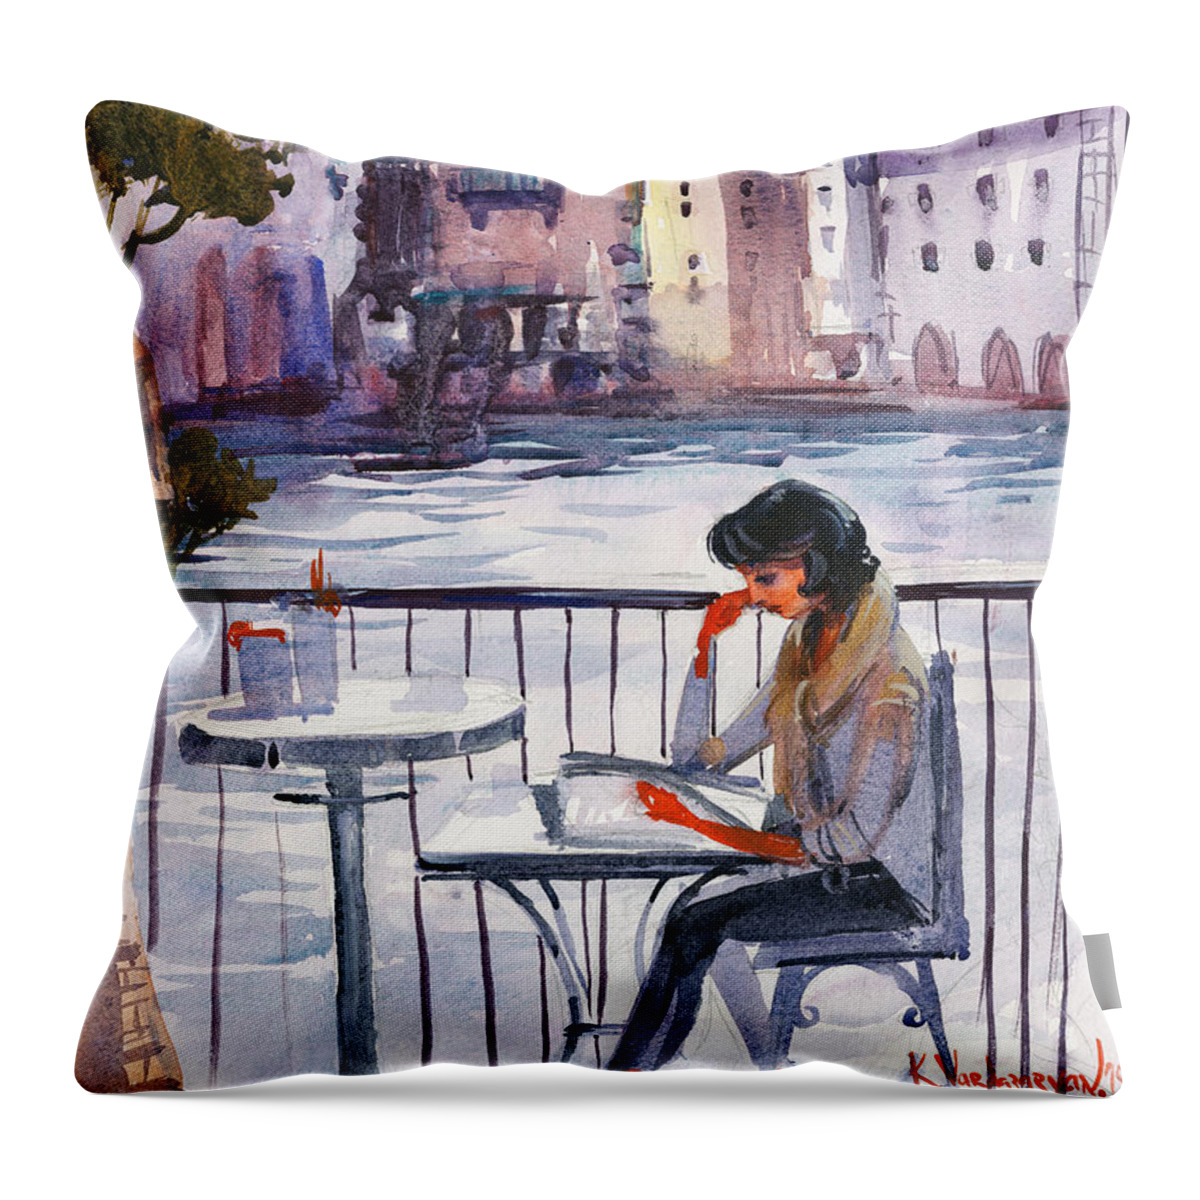 Landscape Throw Pillow featuring the painting Beautiful Day, Reading by Kristina Vardazaryan